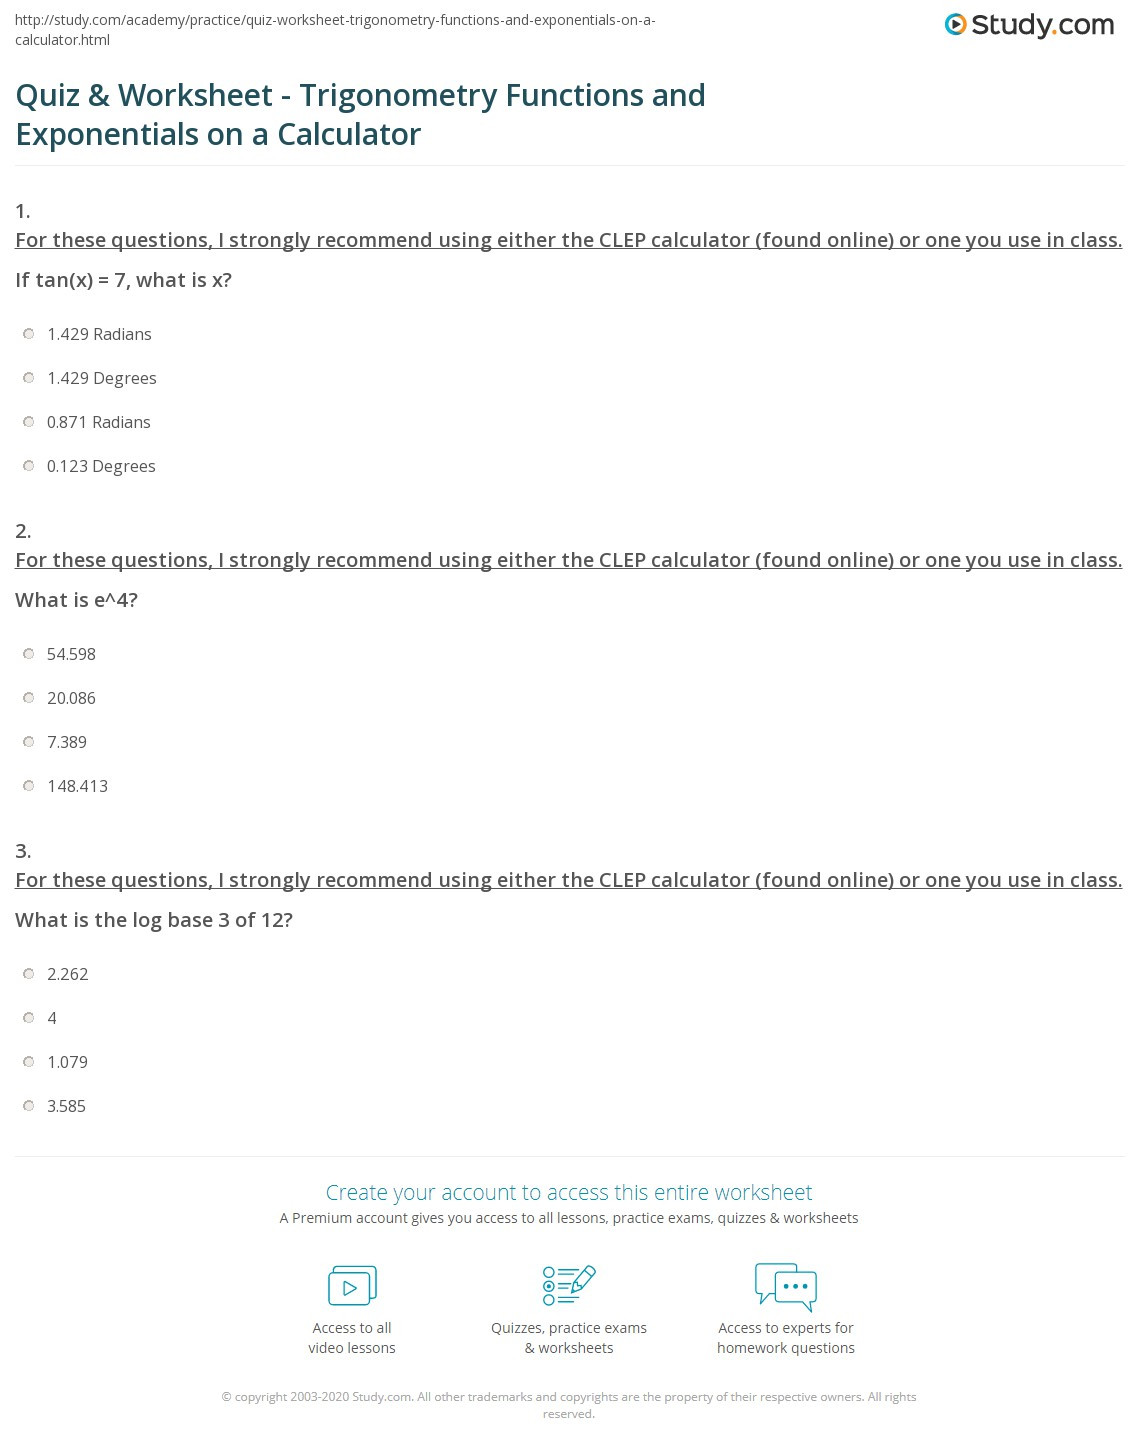 Radians to Degrees Worksheet Quiz &amp; Worksheet Trigonometry Functions and Exponentials